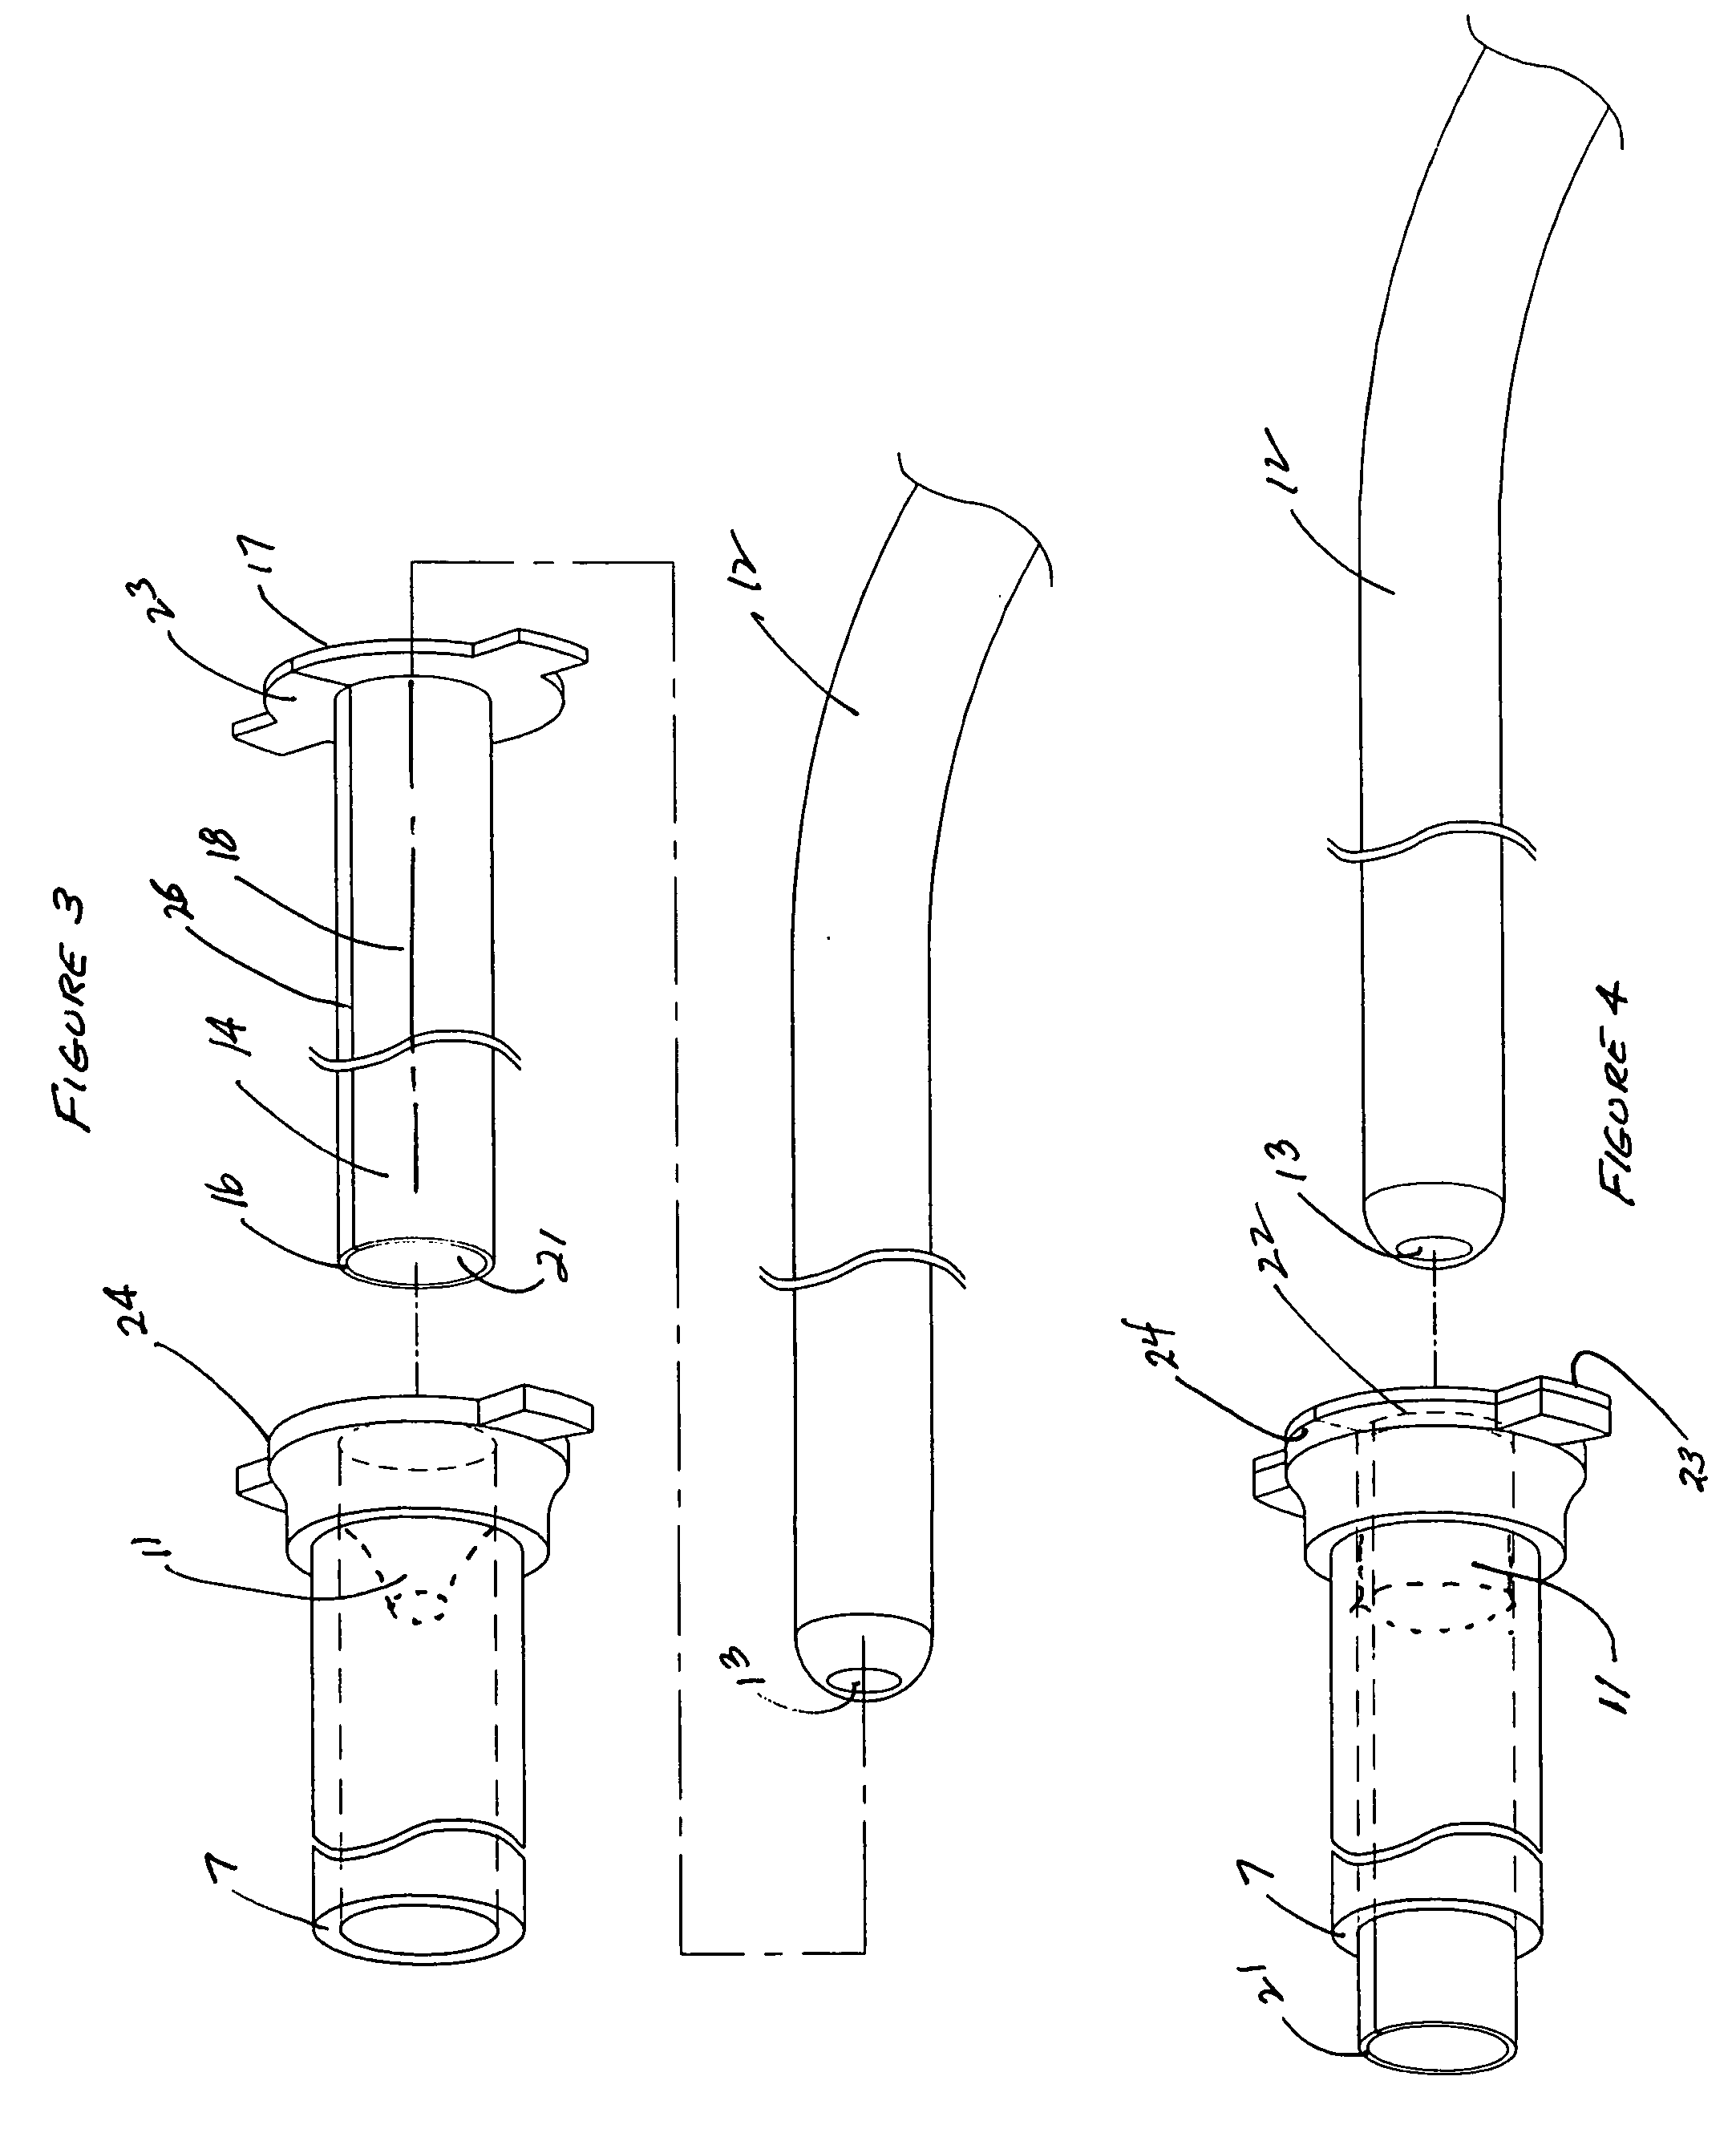 Device for shielding the lens of a flexible or rigid surgical endoscope